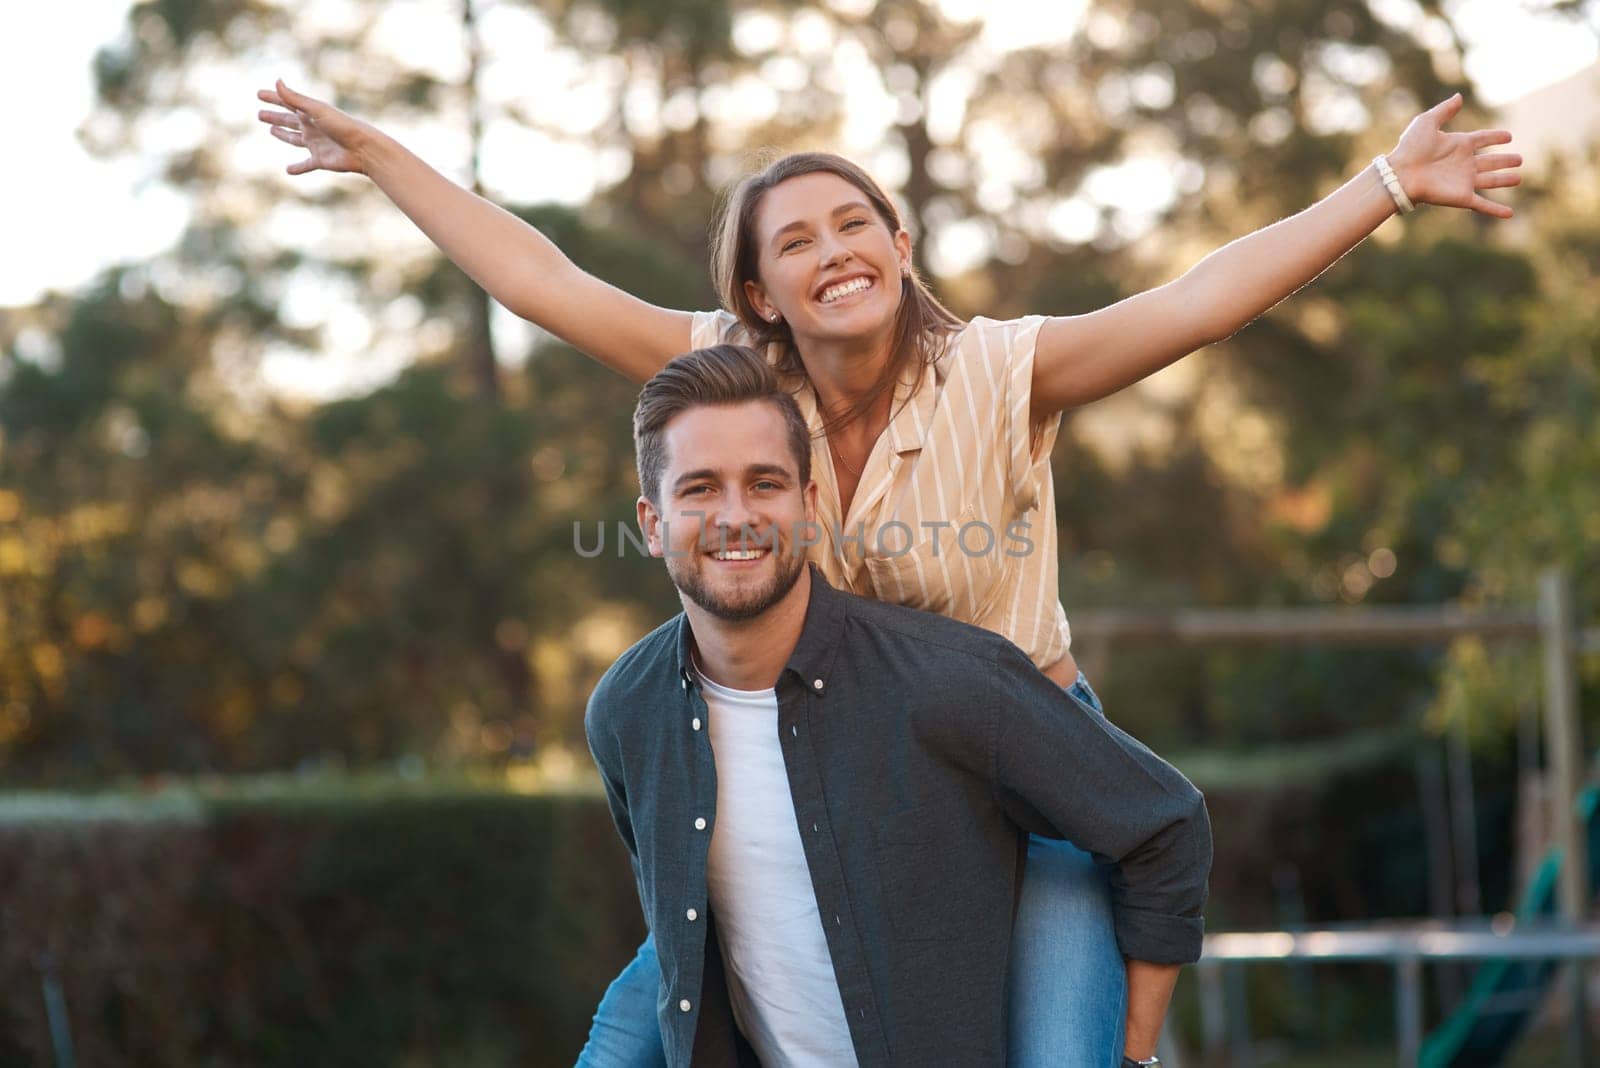 Man, woman and portrait with piggyback outdoor for relationship connection, anniversary or celebration. Happy couple, face and romance date in garden with airplane game for fun, playing or bonding.